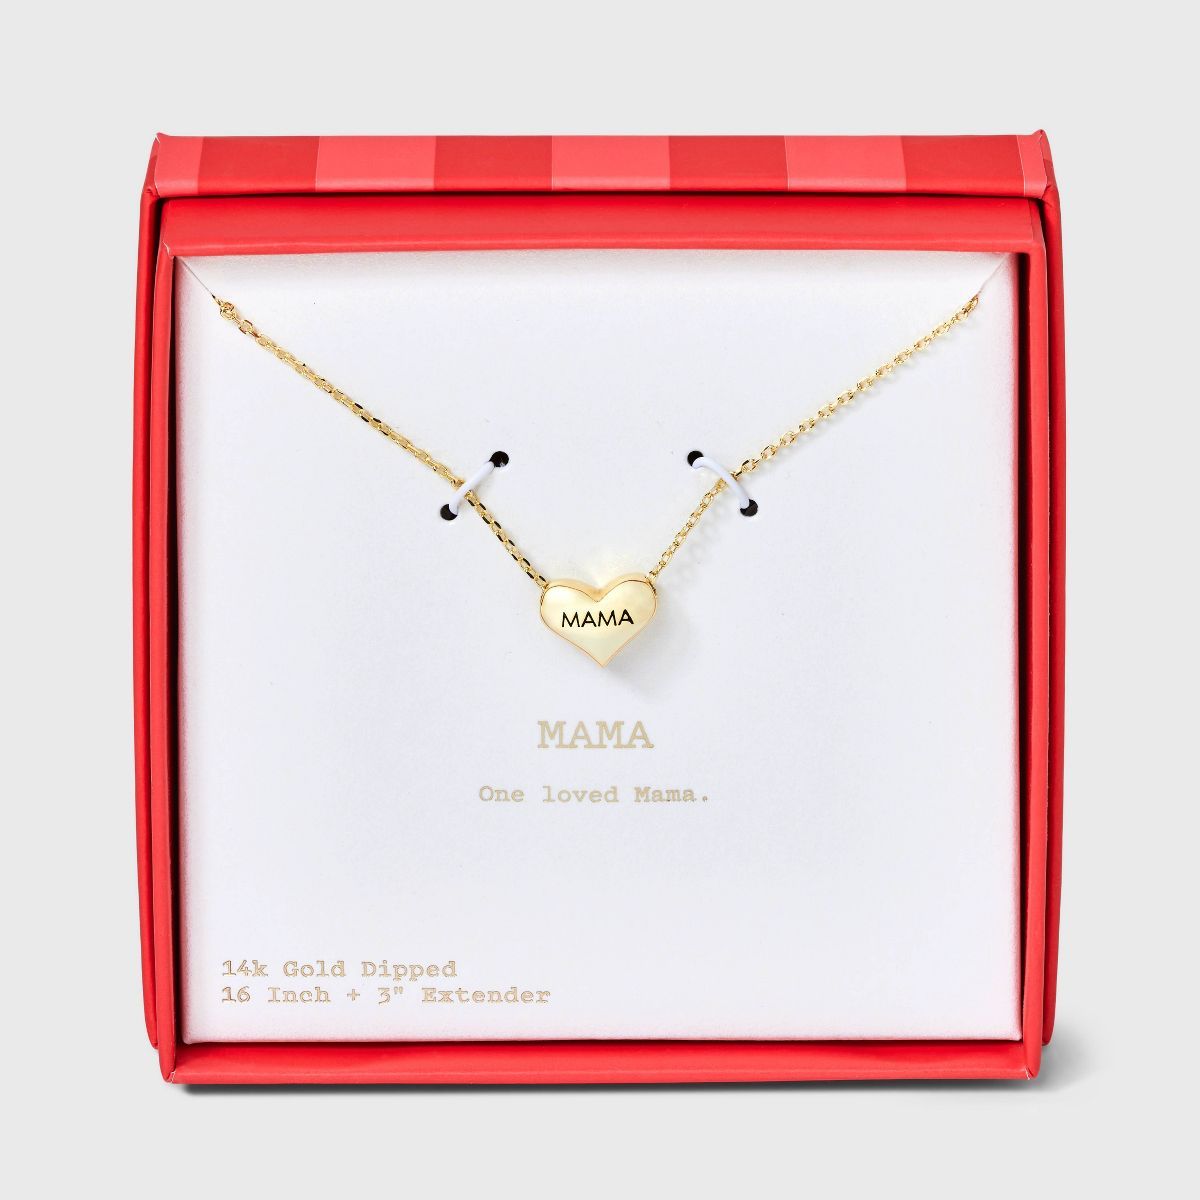 14K Gold Dipped "Mama" Puffed Heart Pendant Necklace - A New Day™ Gold | Target